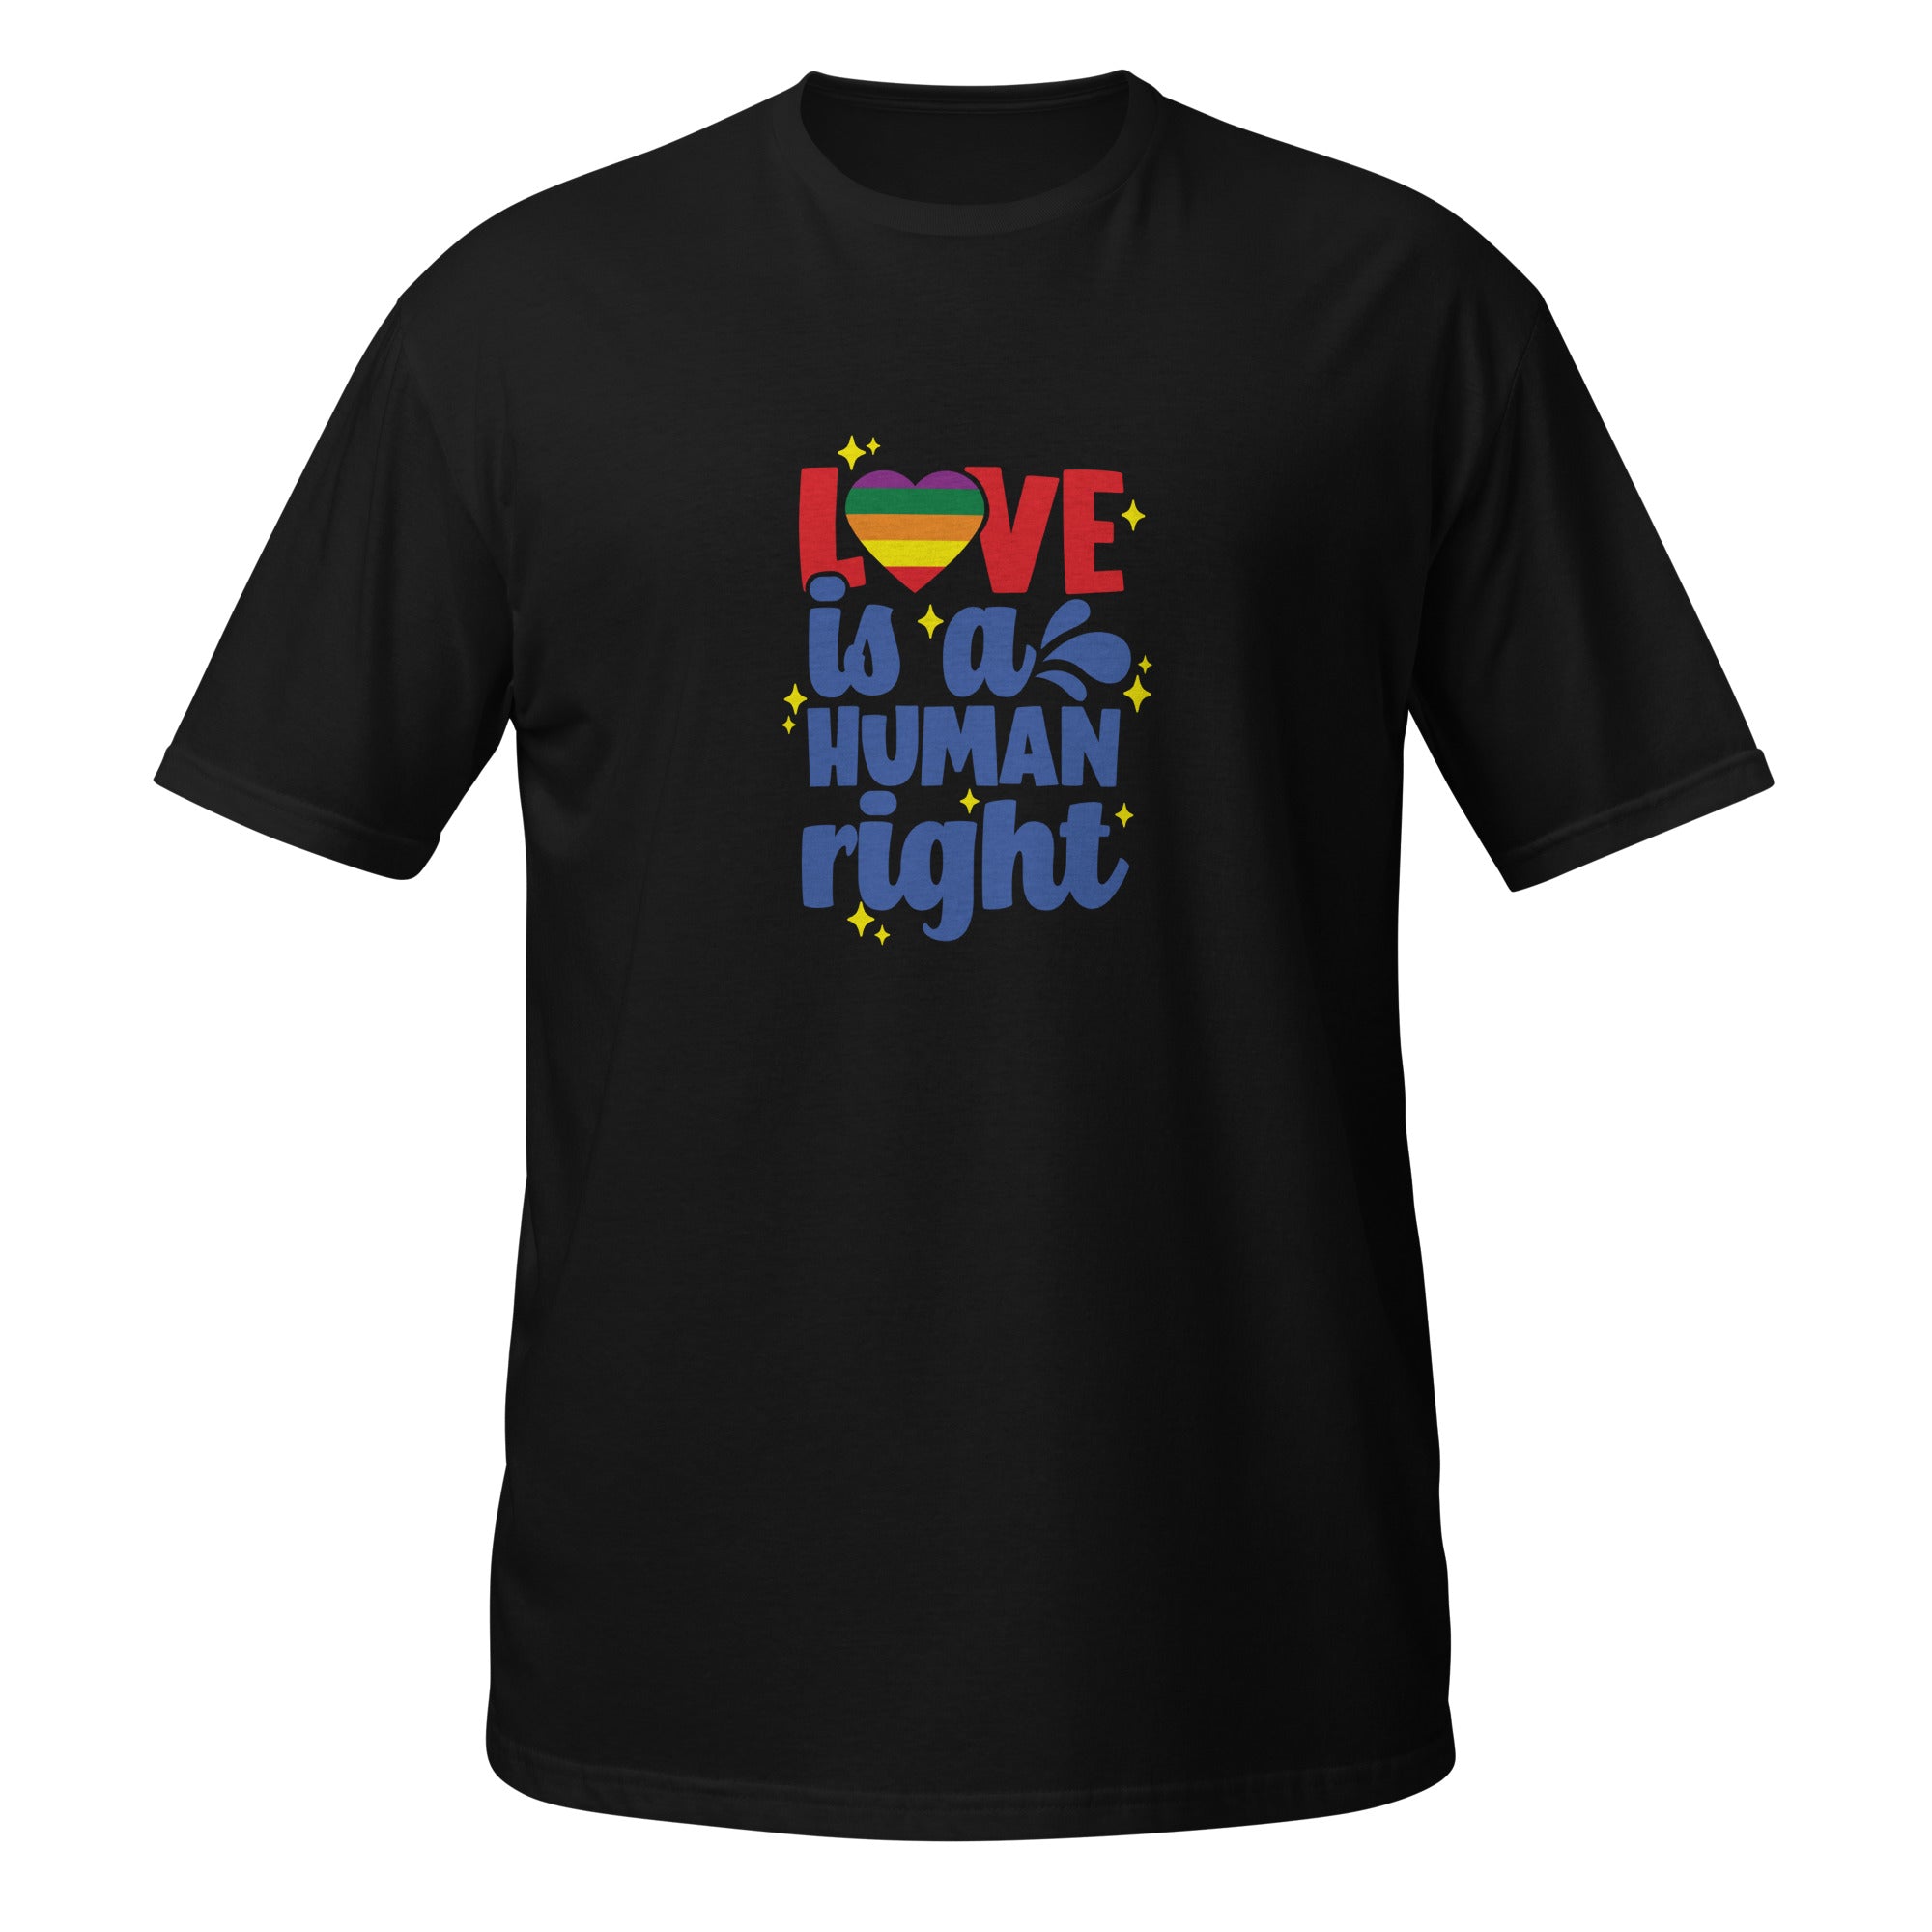 Short-Sleeve Unisex T-Shirt- Love is a human right